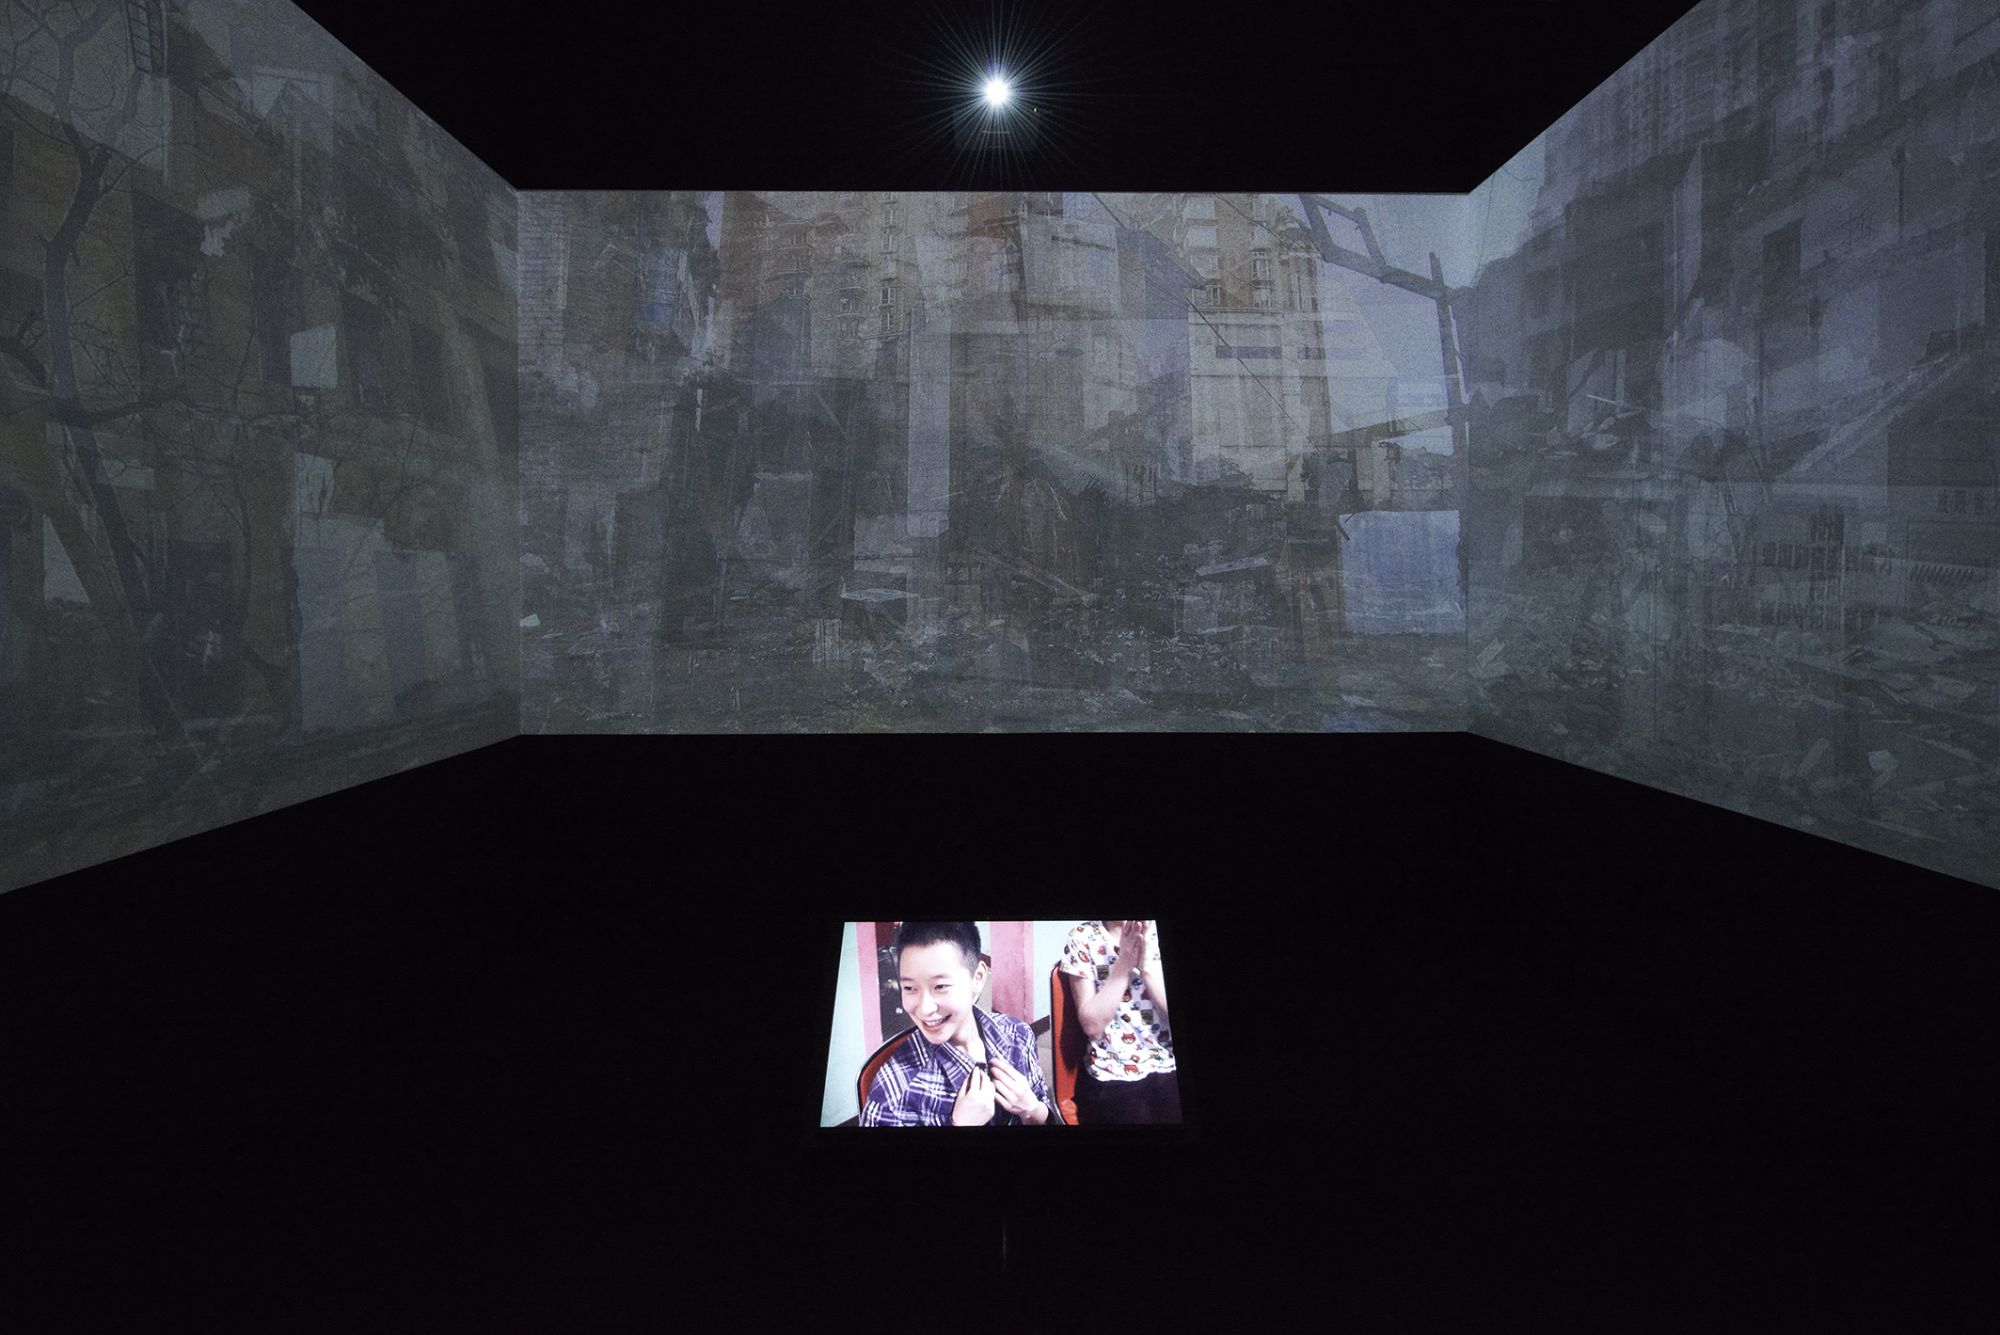 Exhibition view of Go-Betweens: The World Seen Through Children, 2014 Lost Boundaries (잃어버린 경계들) & Wounded (상처 입은), Video installation, color, 2014